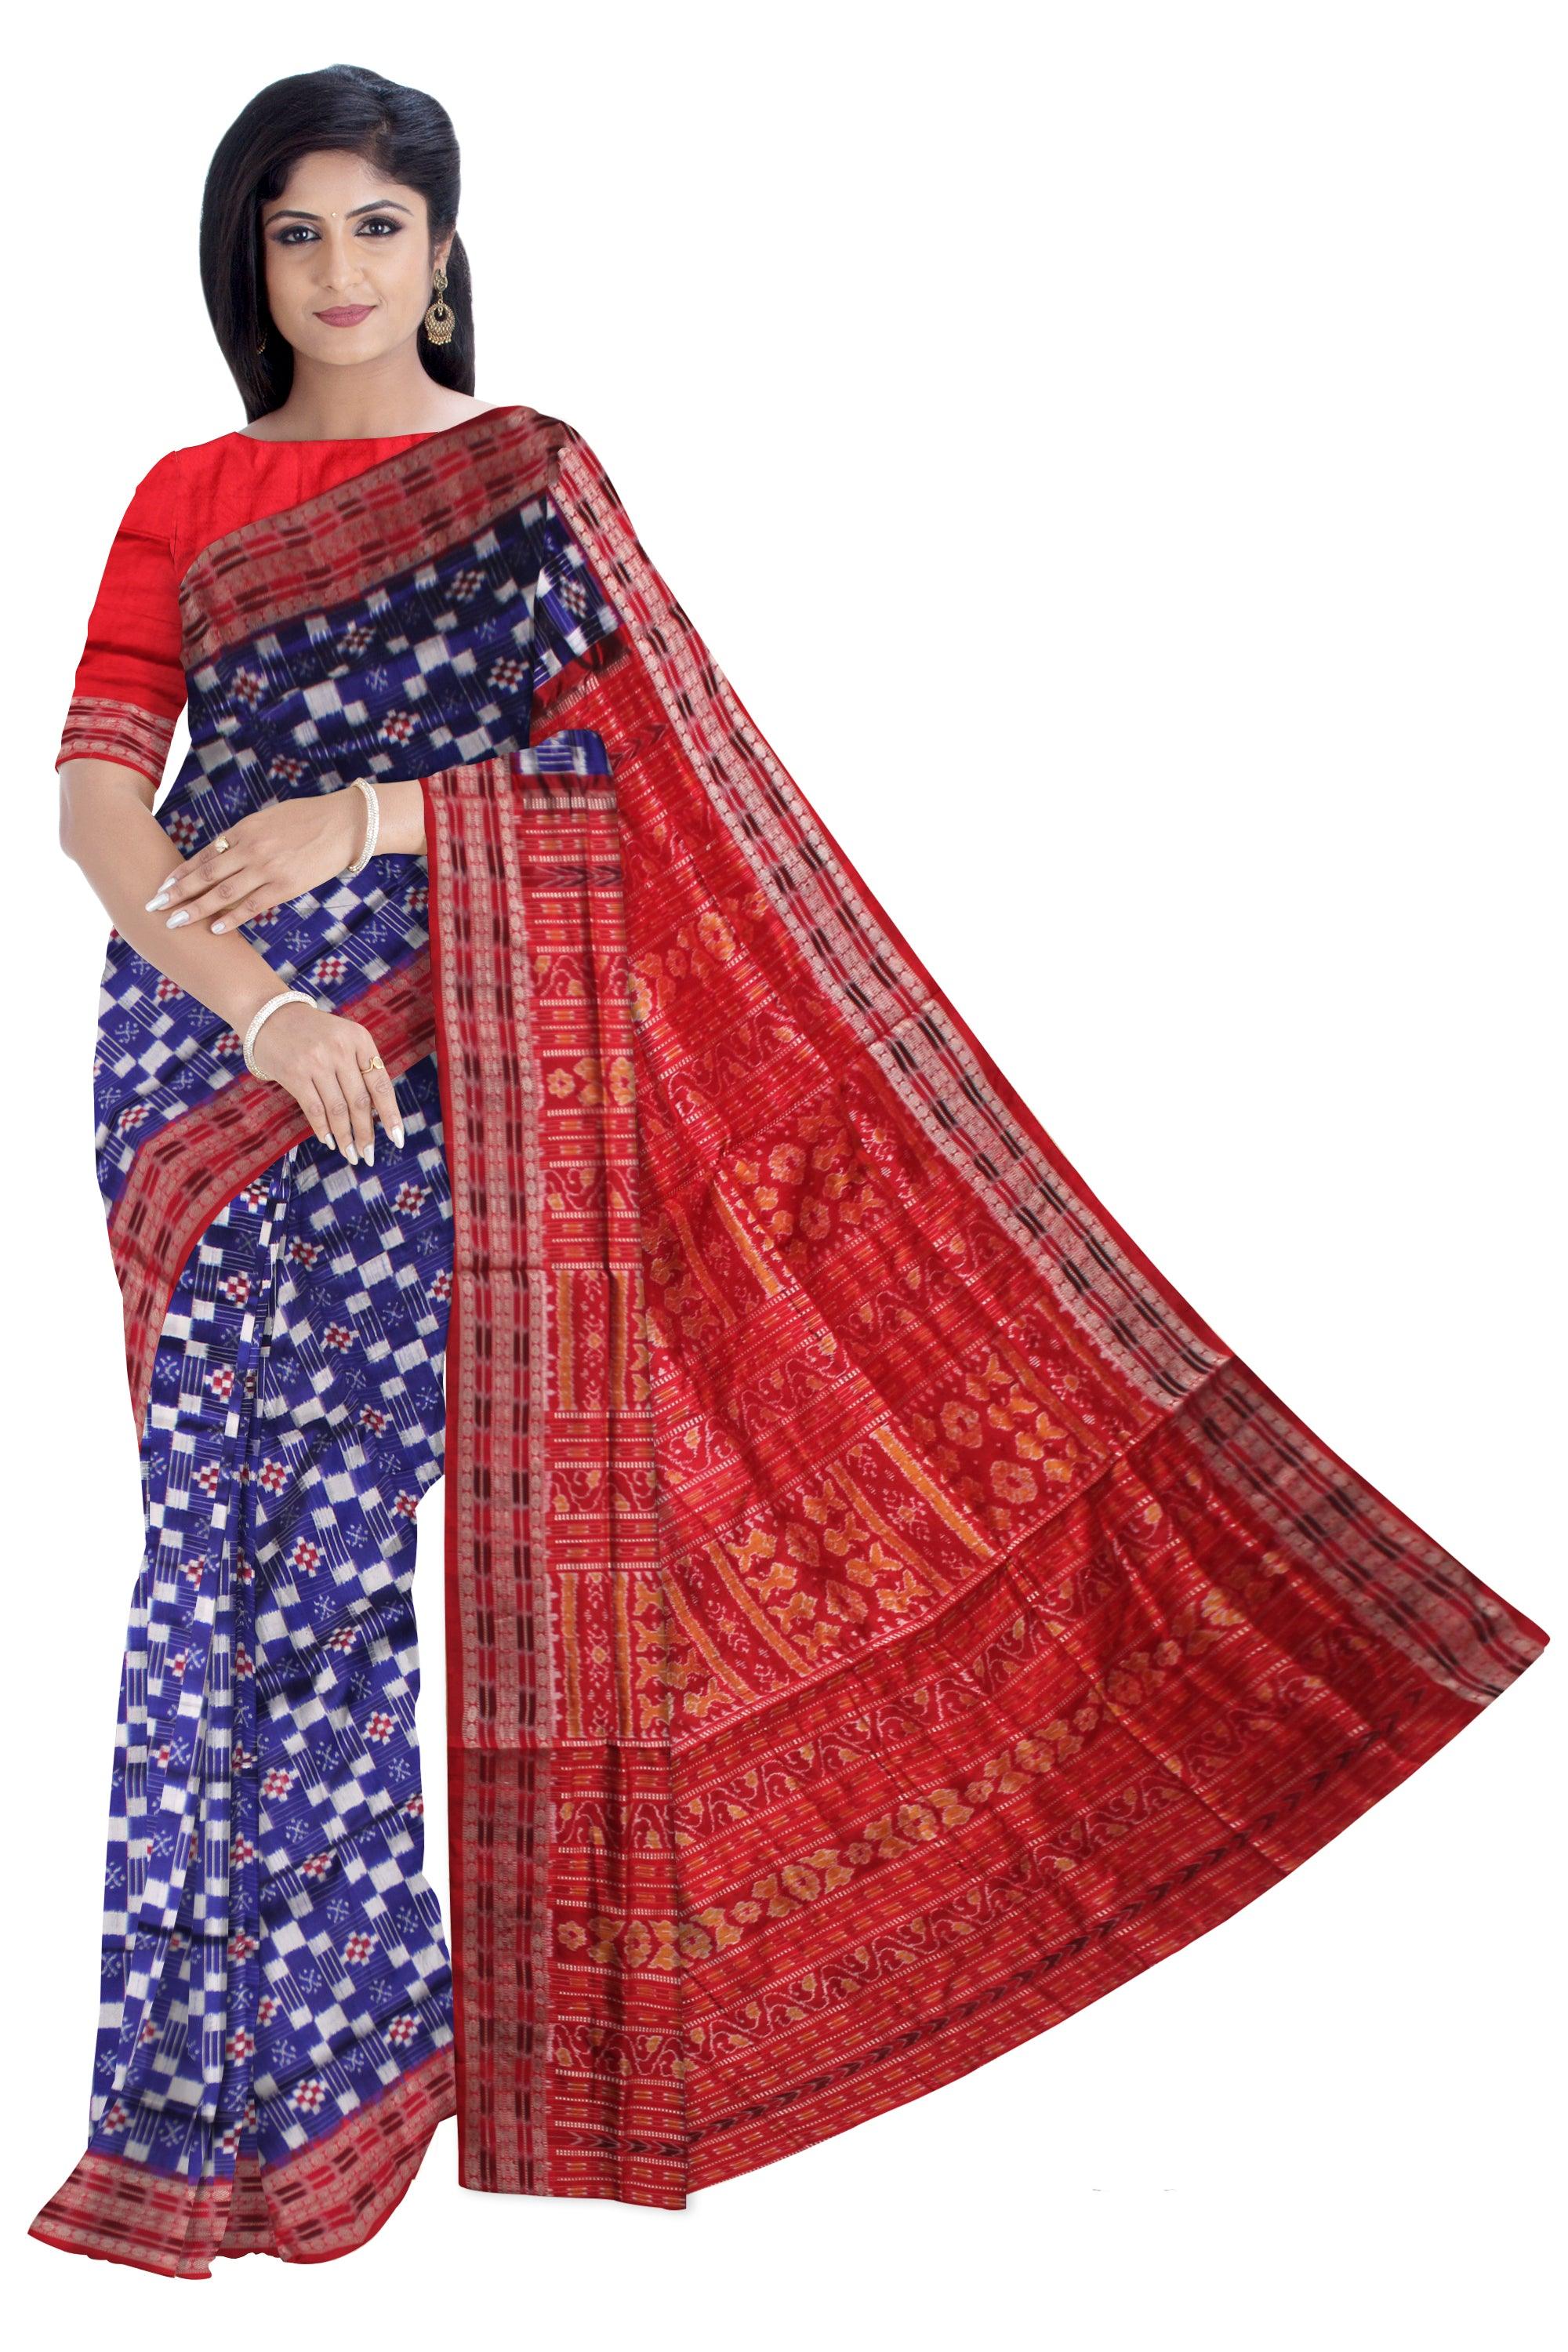 FESTIVAL COLLECTION  PASAPALI PATTERN PATA SAREE IN BLUE AND RED COLOR BASE, ATTACHED WITH BLOUSE PIECE. - Koshali Arts & Crafts Enterprise